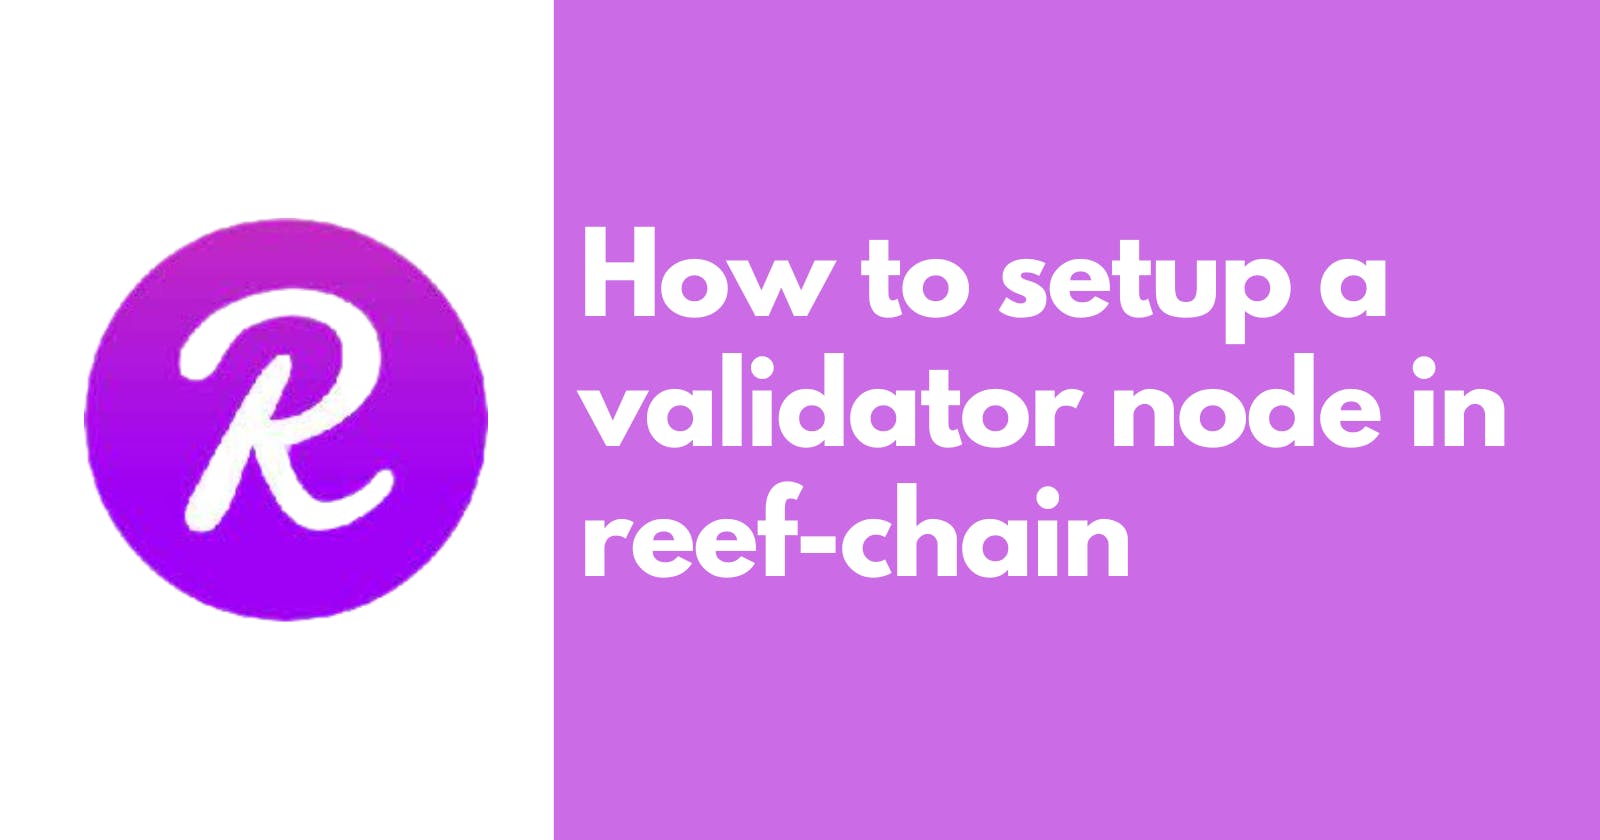 Beginners guide: How to setup a validator node in reef-chain